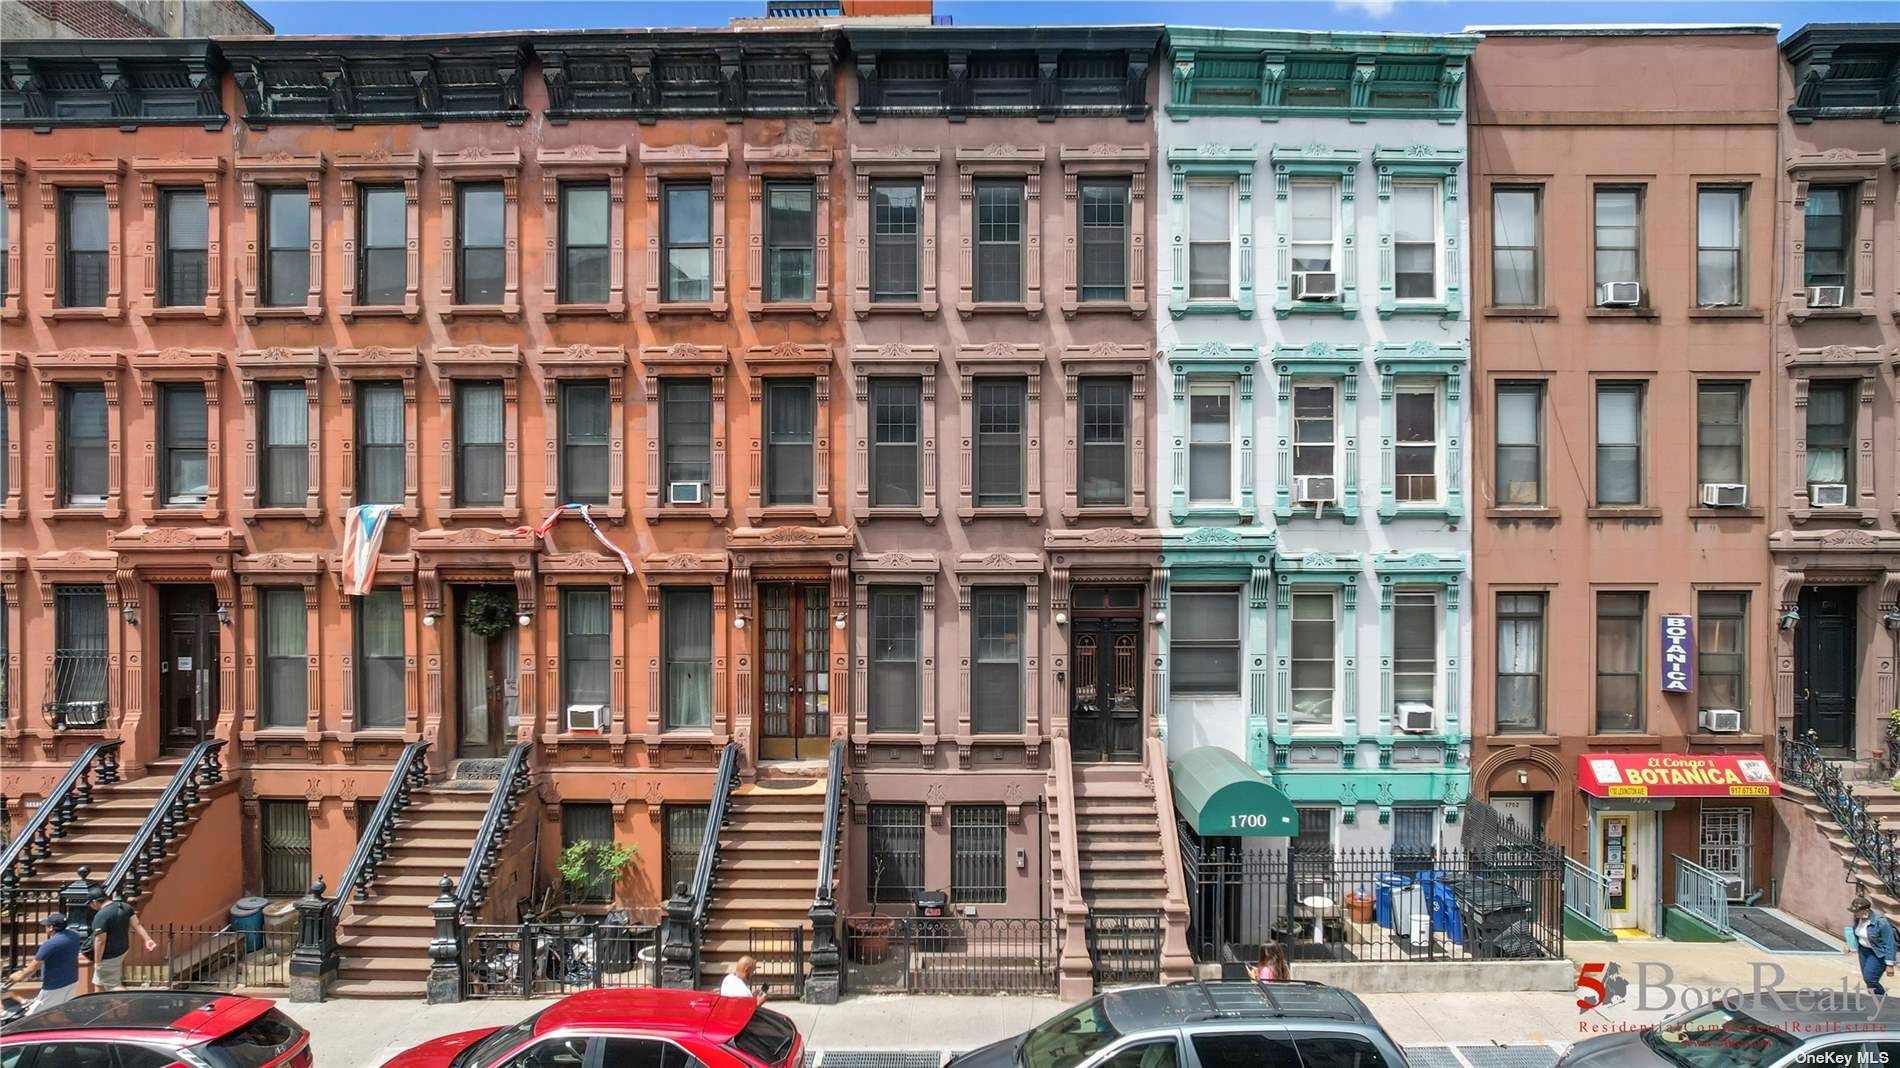 Brownstone ? Lexington ? Take a look at this historical 3, 920 SQFT Brownstone consists of six studios and a garden duplex apartment, mostly fully renovated !